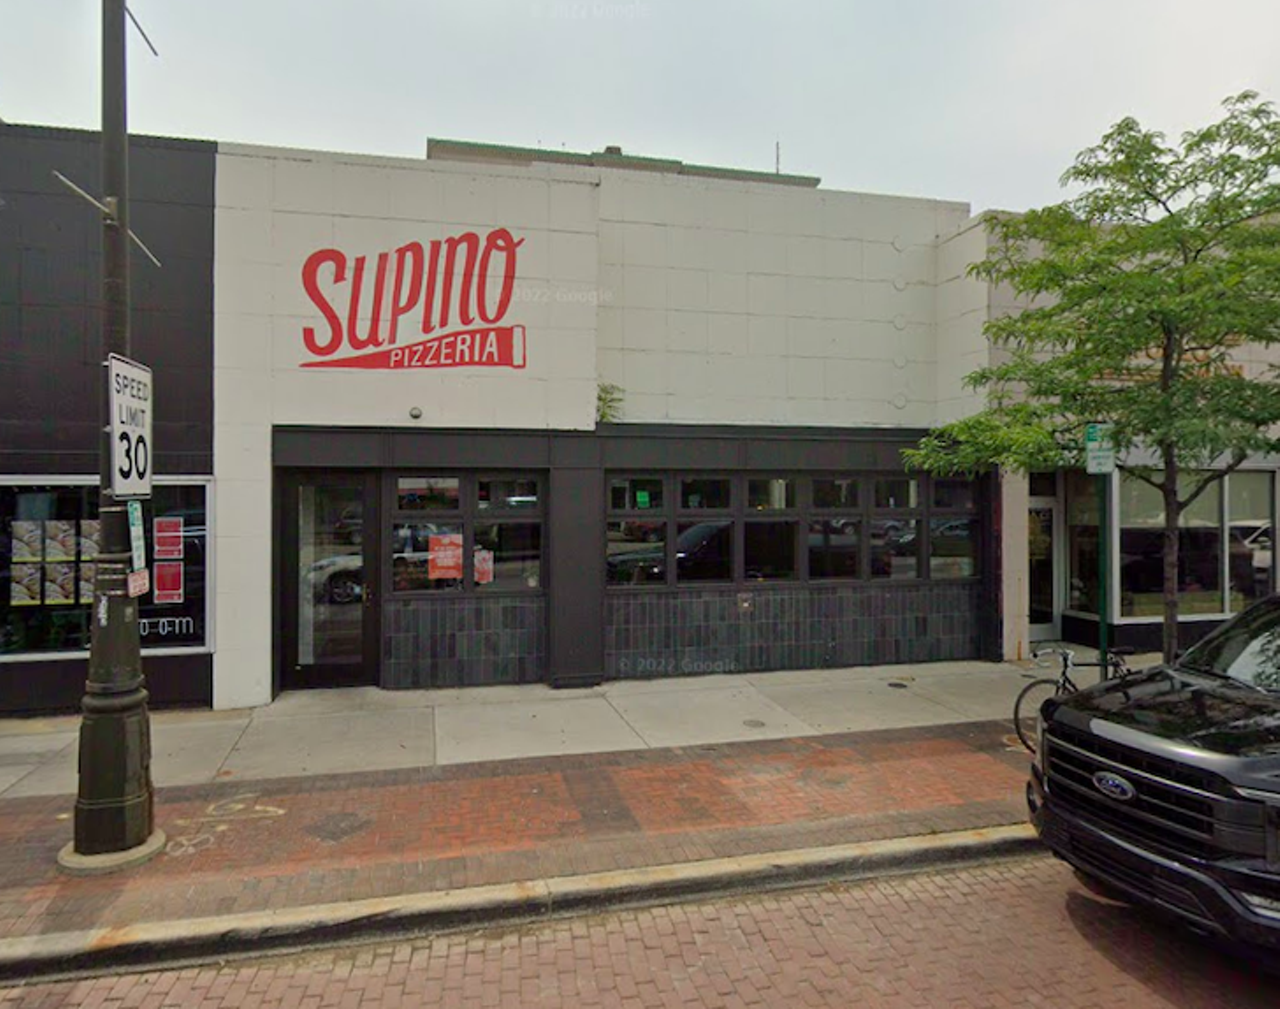 Supino
6519 Woodward Ave., Detroit; 313-314-7400 | 2457 Russell St., Detroit; 313-567-7879; supinopizzeria.com
So $10 might not get you an entire pizza, but you can get a few of Supino's slices (or a cannoli). 